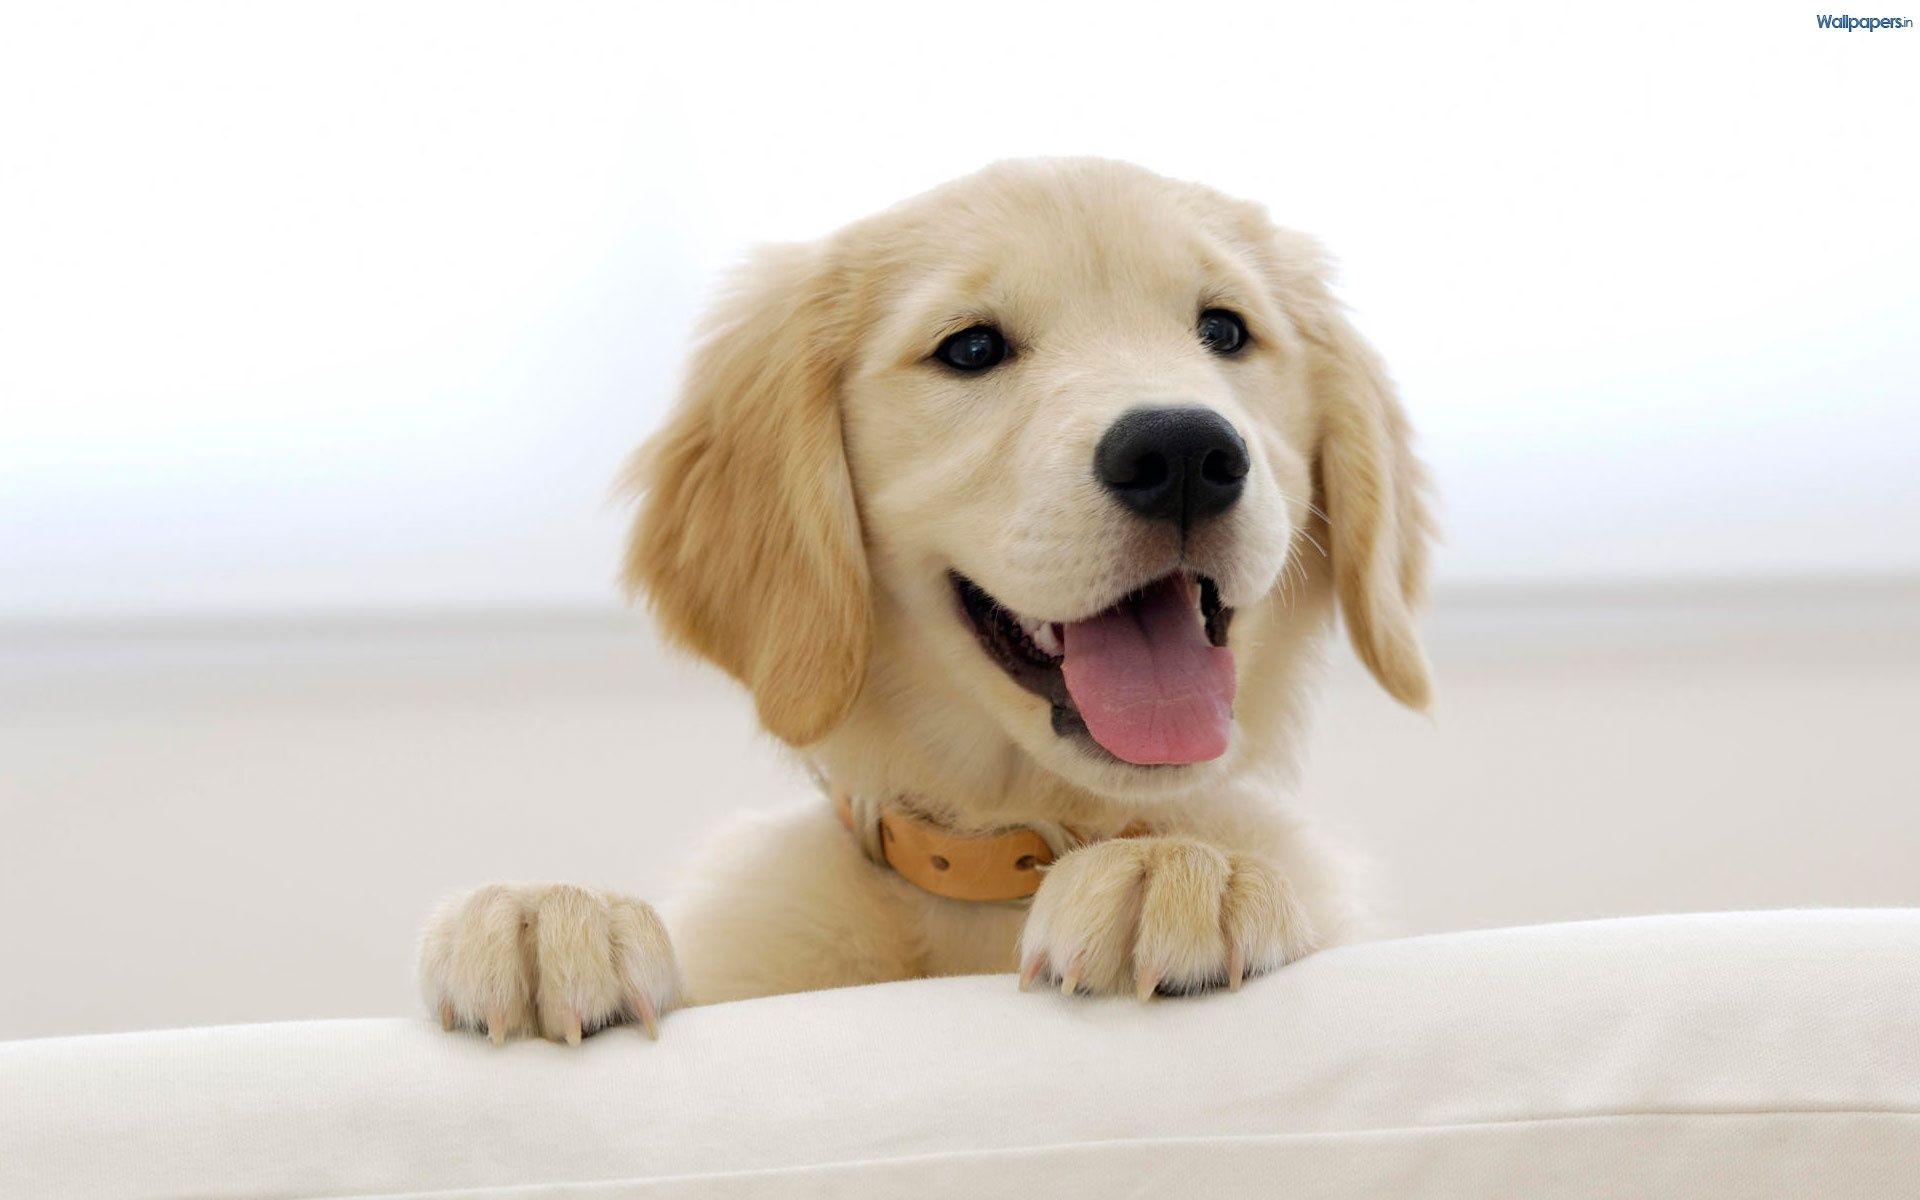 Cute Puppy Wallpapers For Desktop Image & Pictures